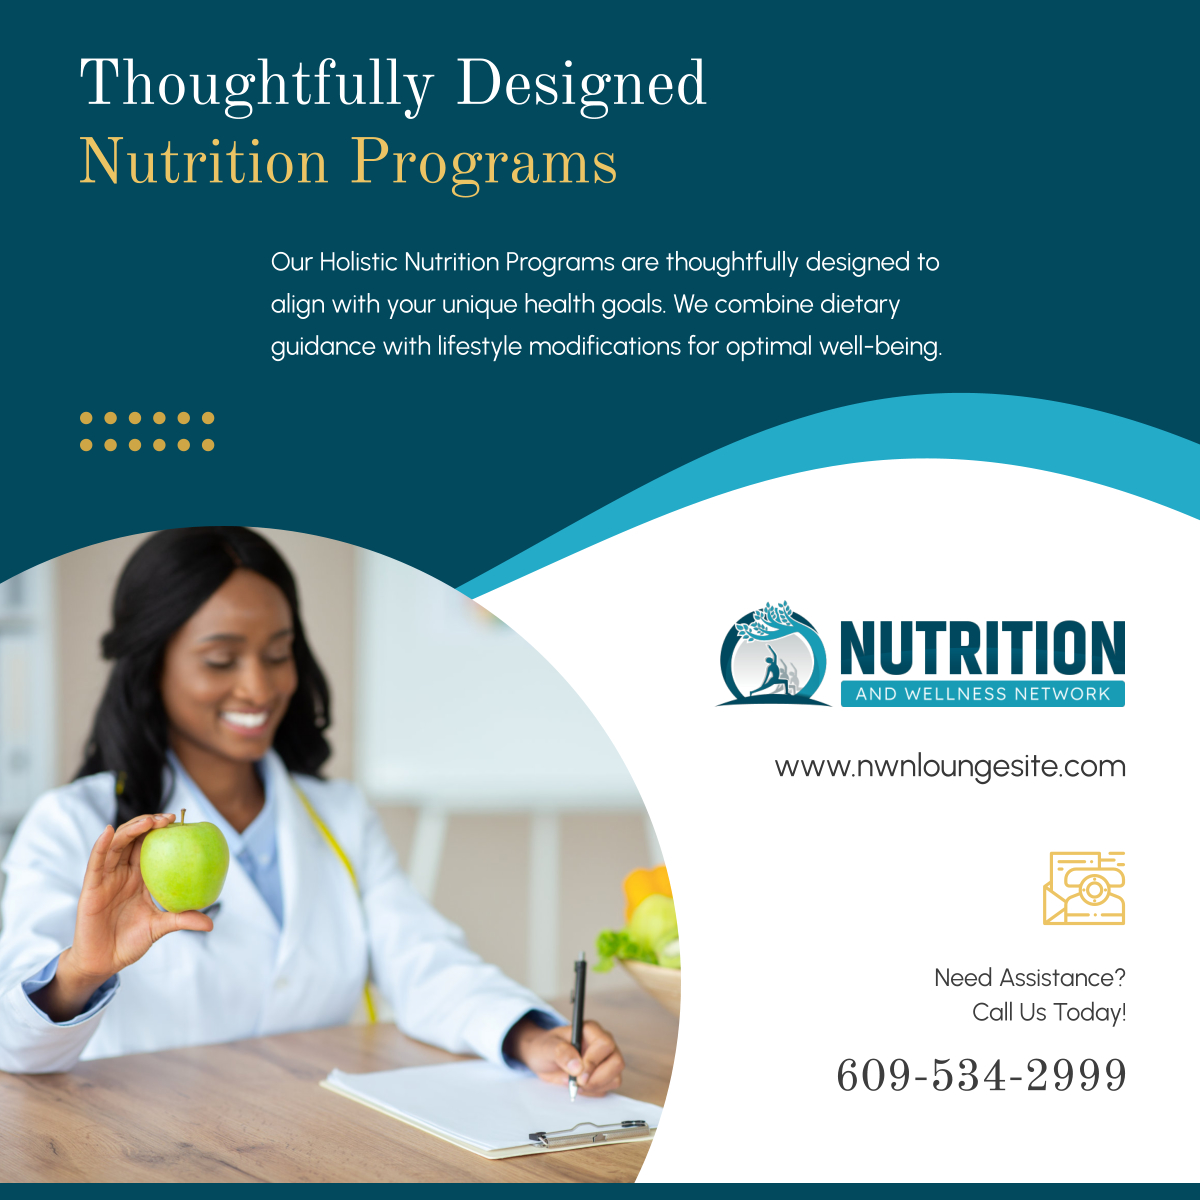 Let's get you started with your transformative journey! Our Holistic Nutrition Programs are where personalized dietary advice meets lifestyle coaching, ensuring a harmonious approach to your health.

#HammontonNJ #WellnessAndFitness #NutritionPrograms